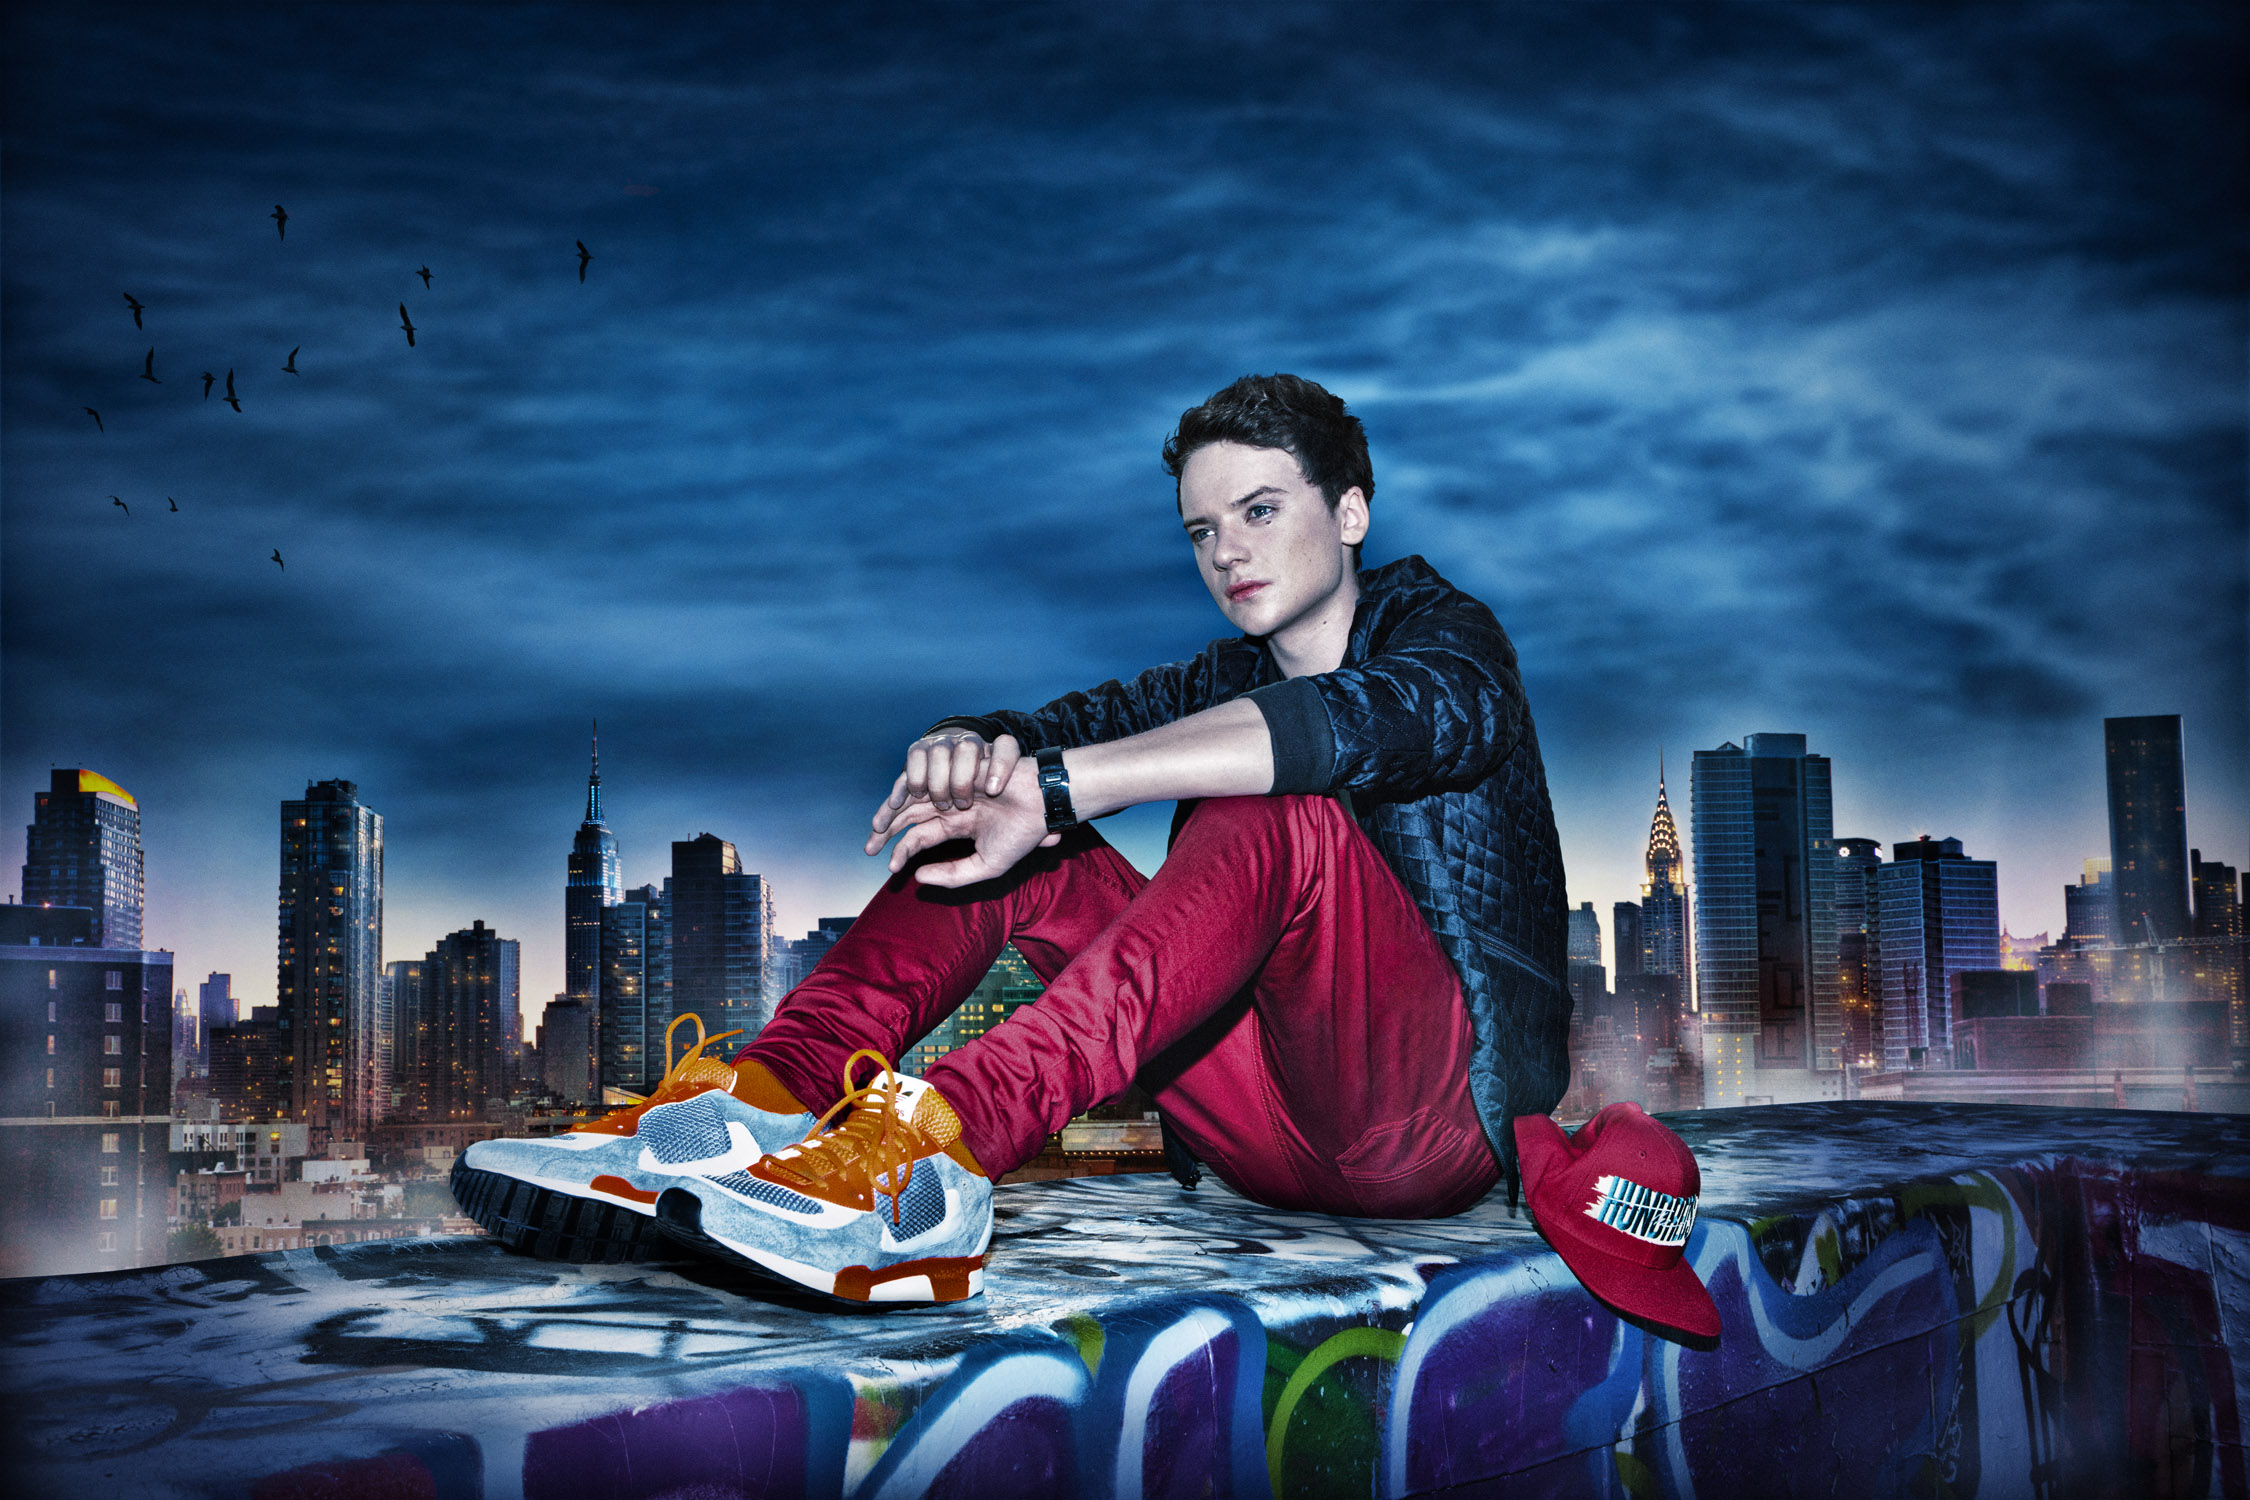 Conor Maynard to play the V Festival in 2012